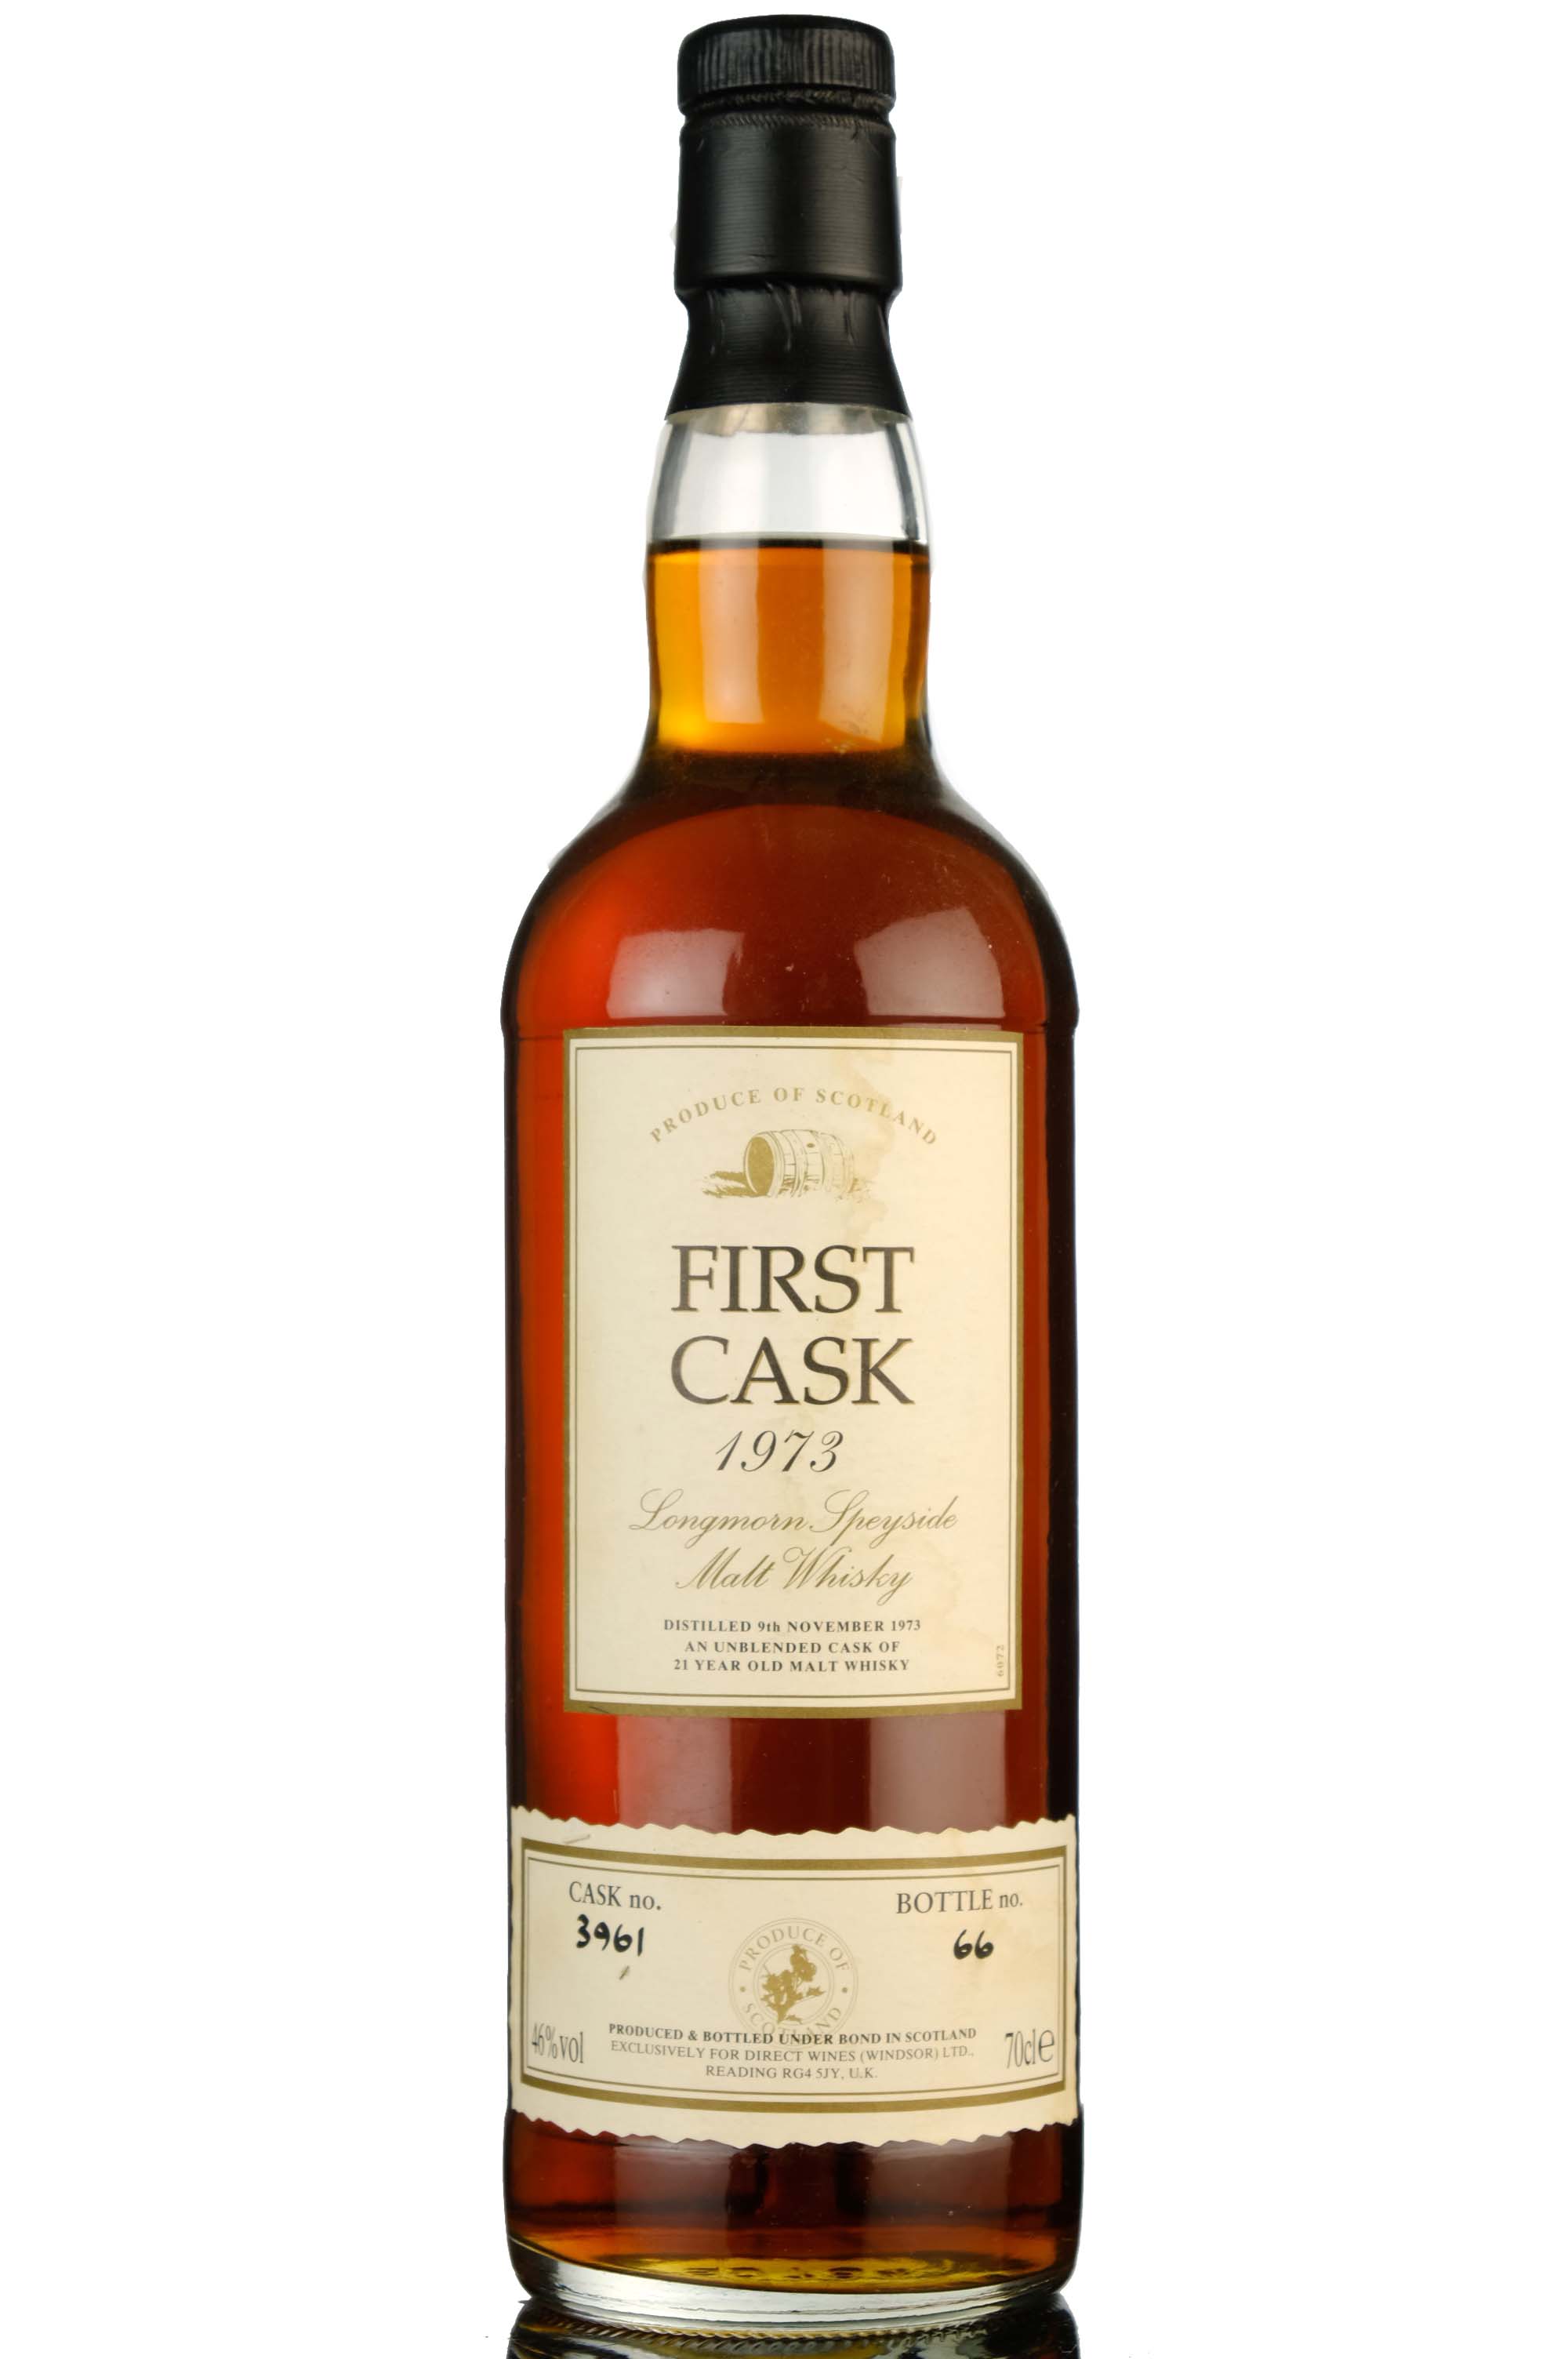 Longmorn 1973 - 21 Year Old - First Cask 3961